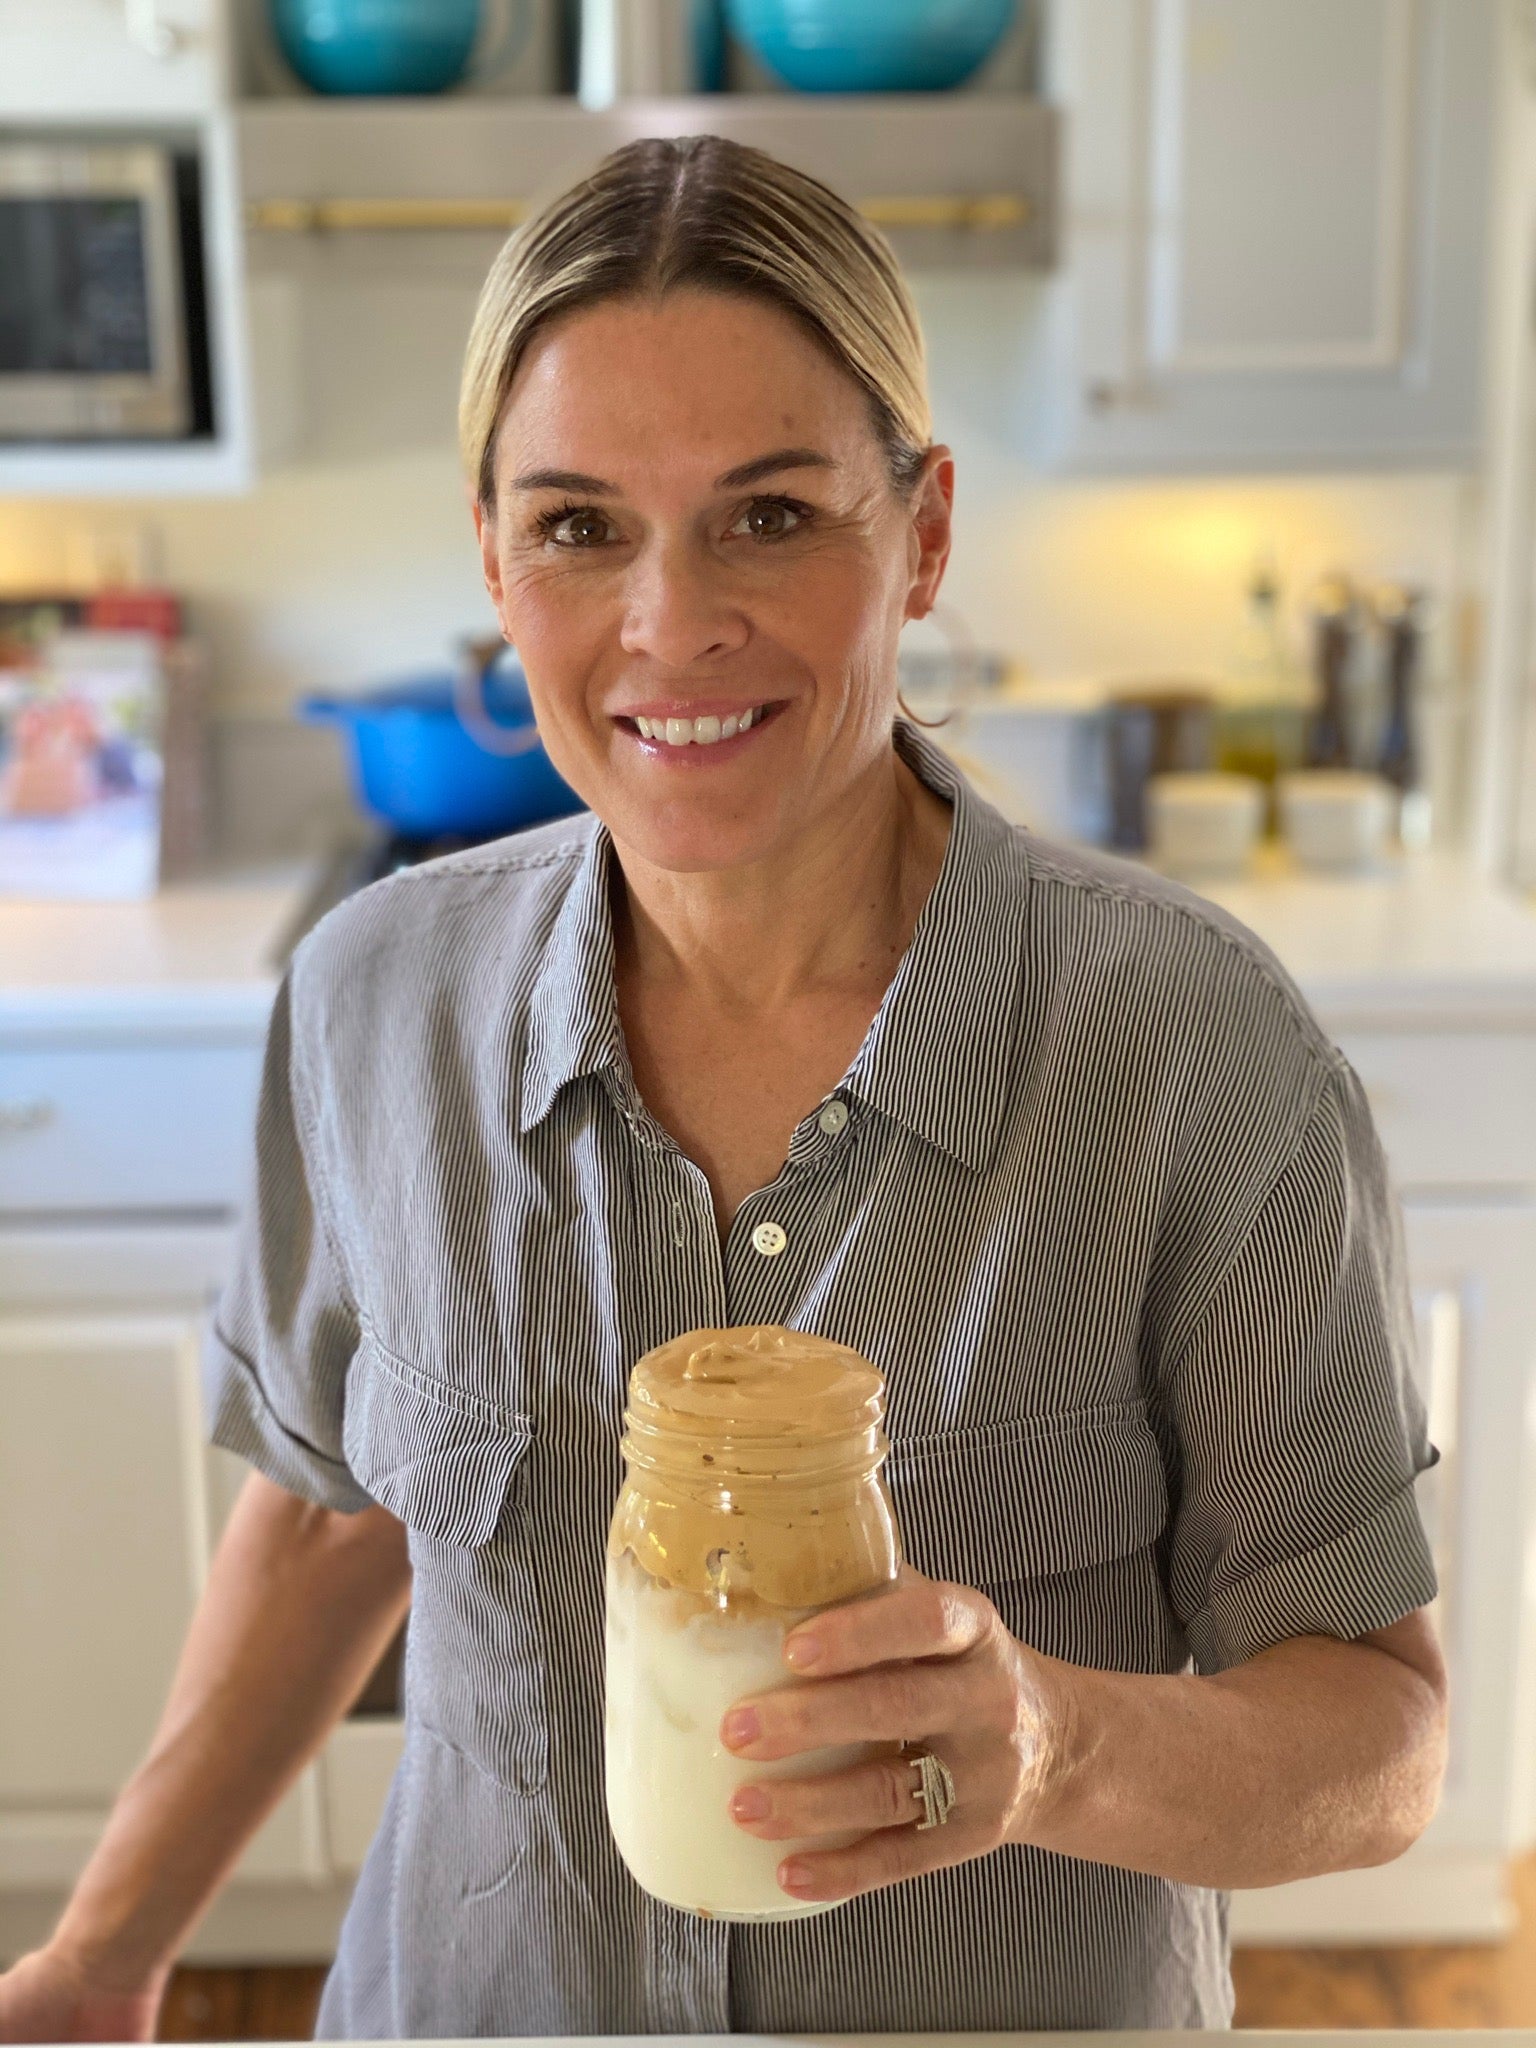 Cat Cora’s Whipped Coffee